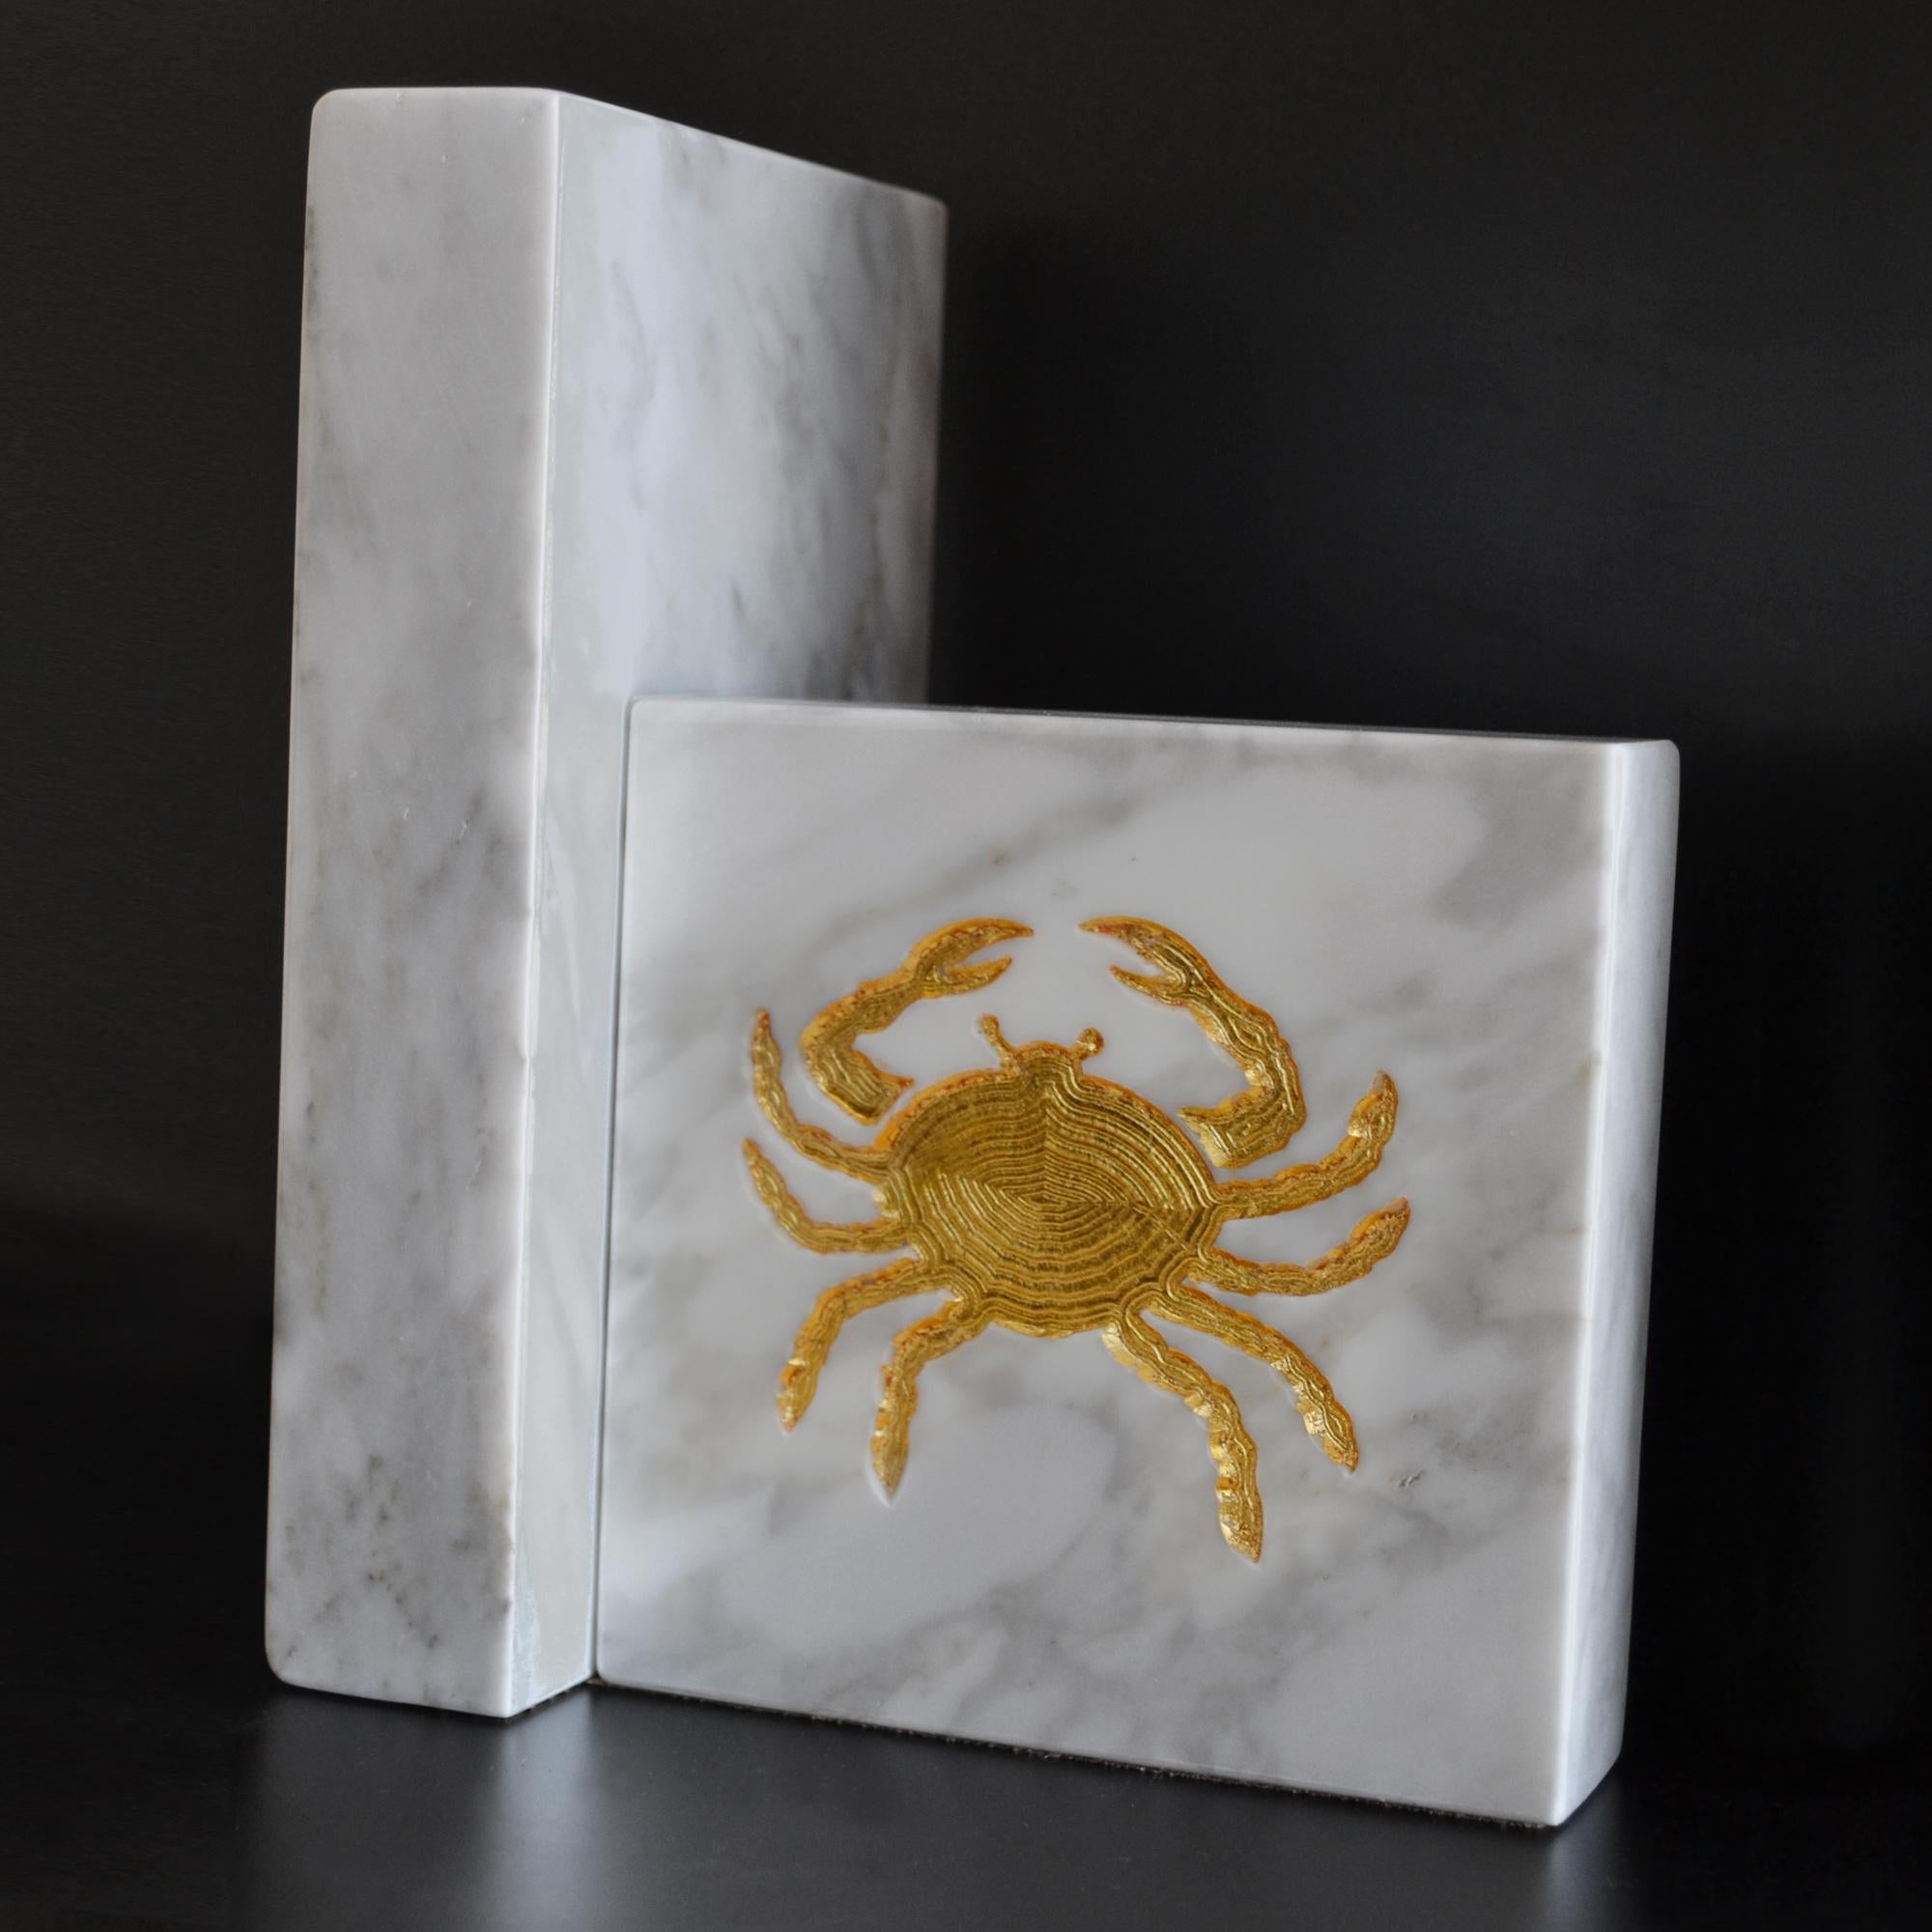 Bookends manufactured in White Carrara Italian marble with inlaid zodiac signs, with gold leaf decoration .You can choose the combination of the two signs, see on the diagram.
weight: kilos 2.10 each one

For EU buyers this piece is subject to